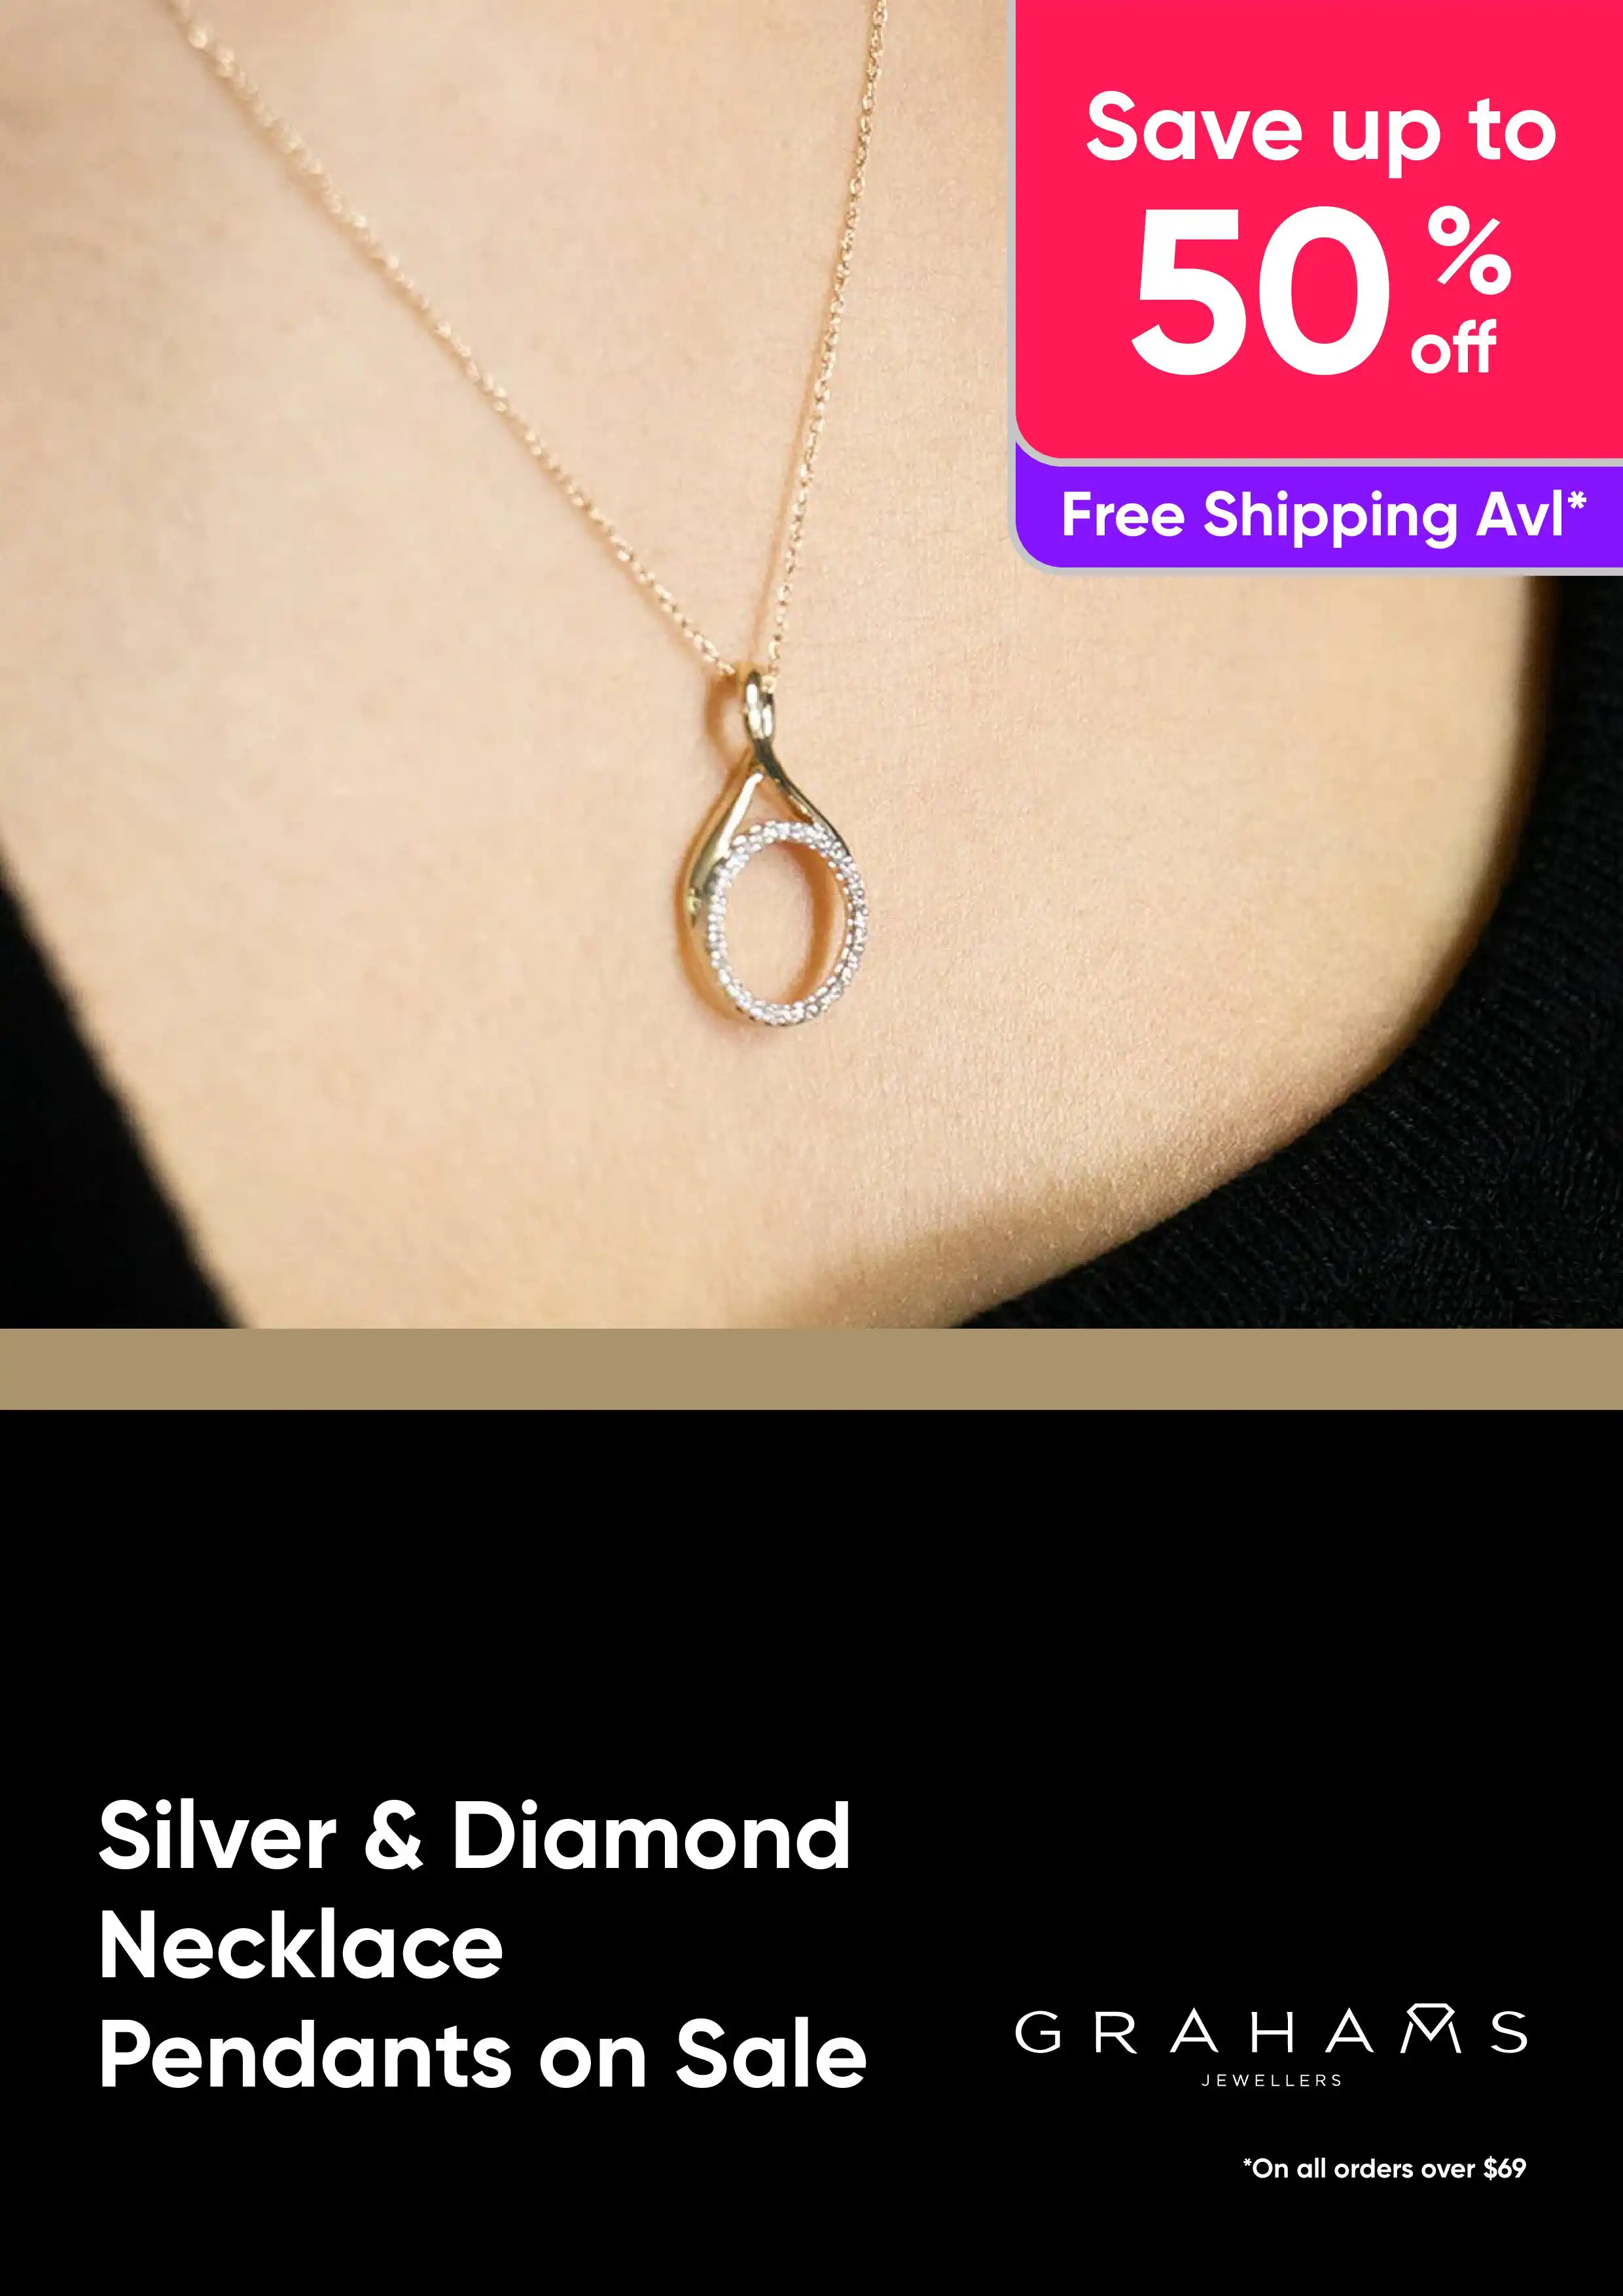 Silver and Diamond Necklace Pendants on Sale - Save Up to 50% Off